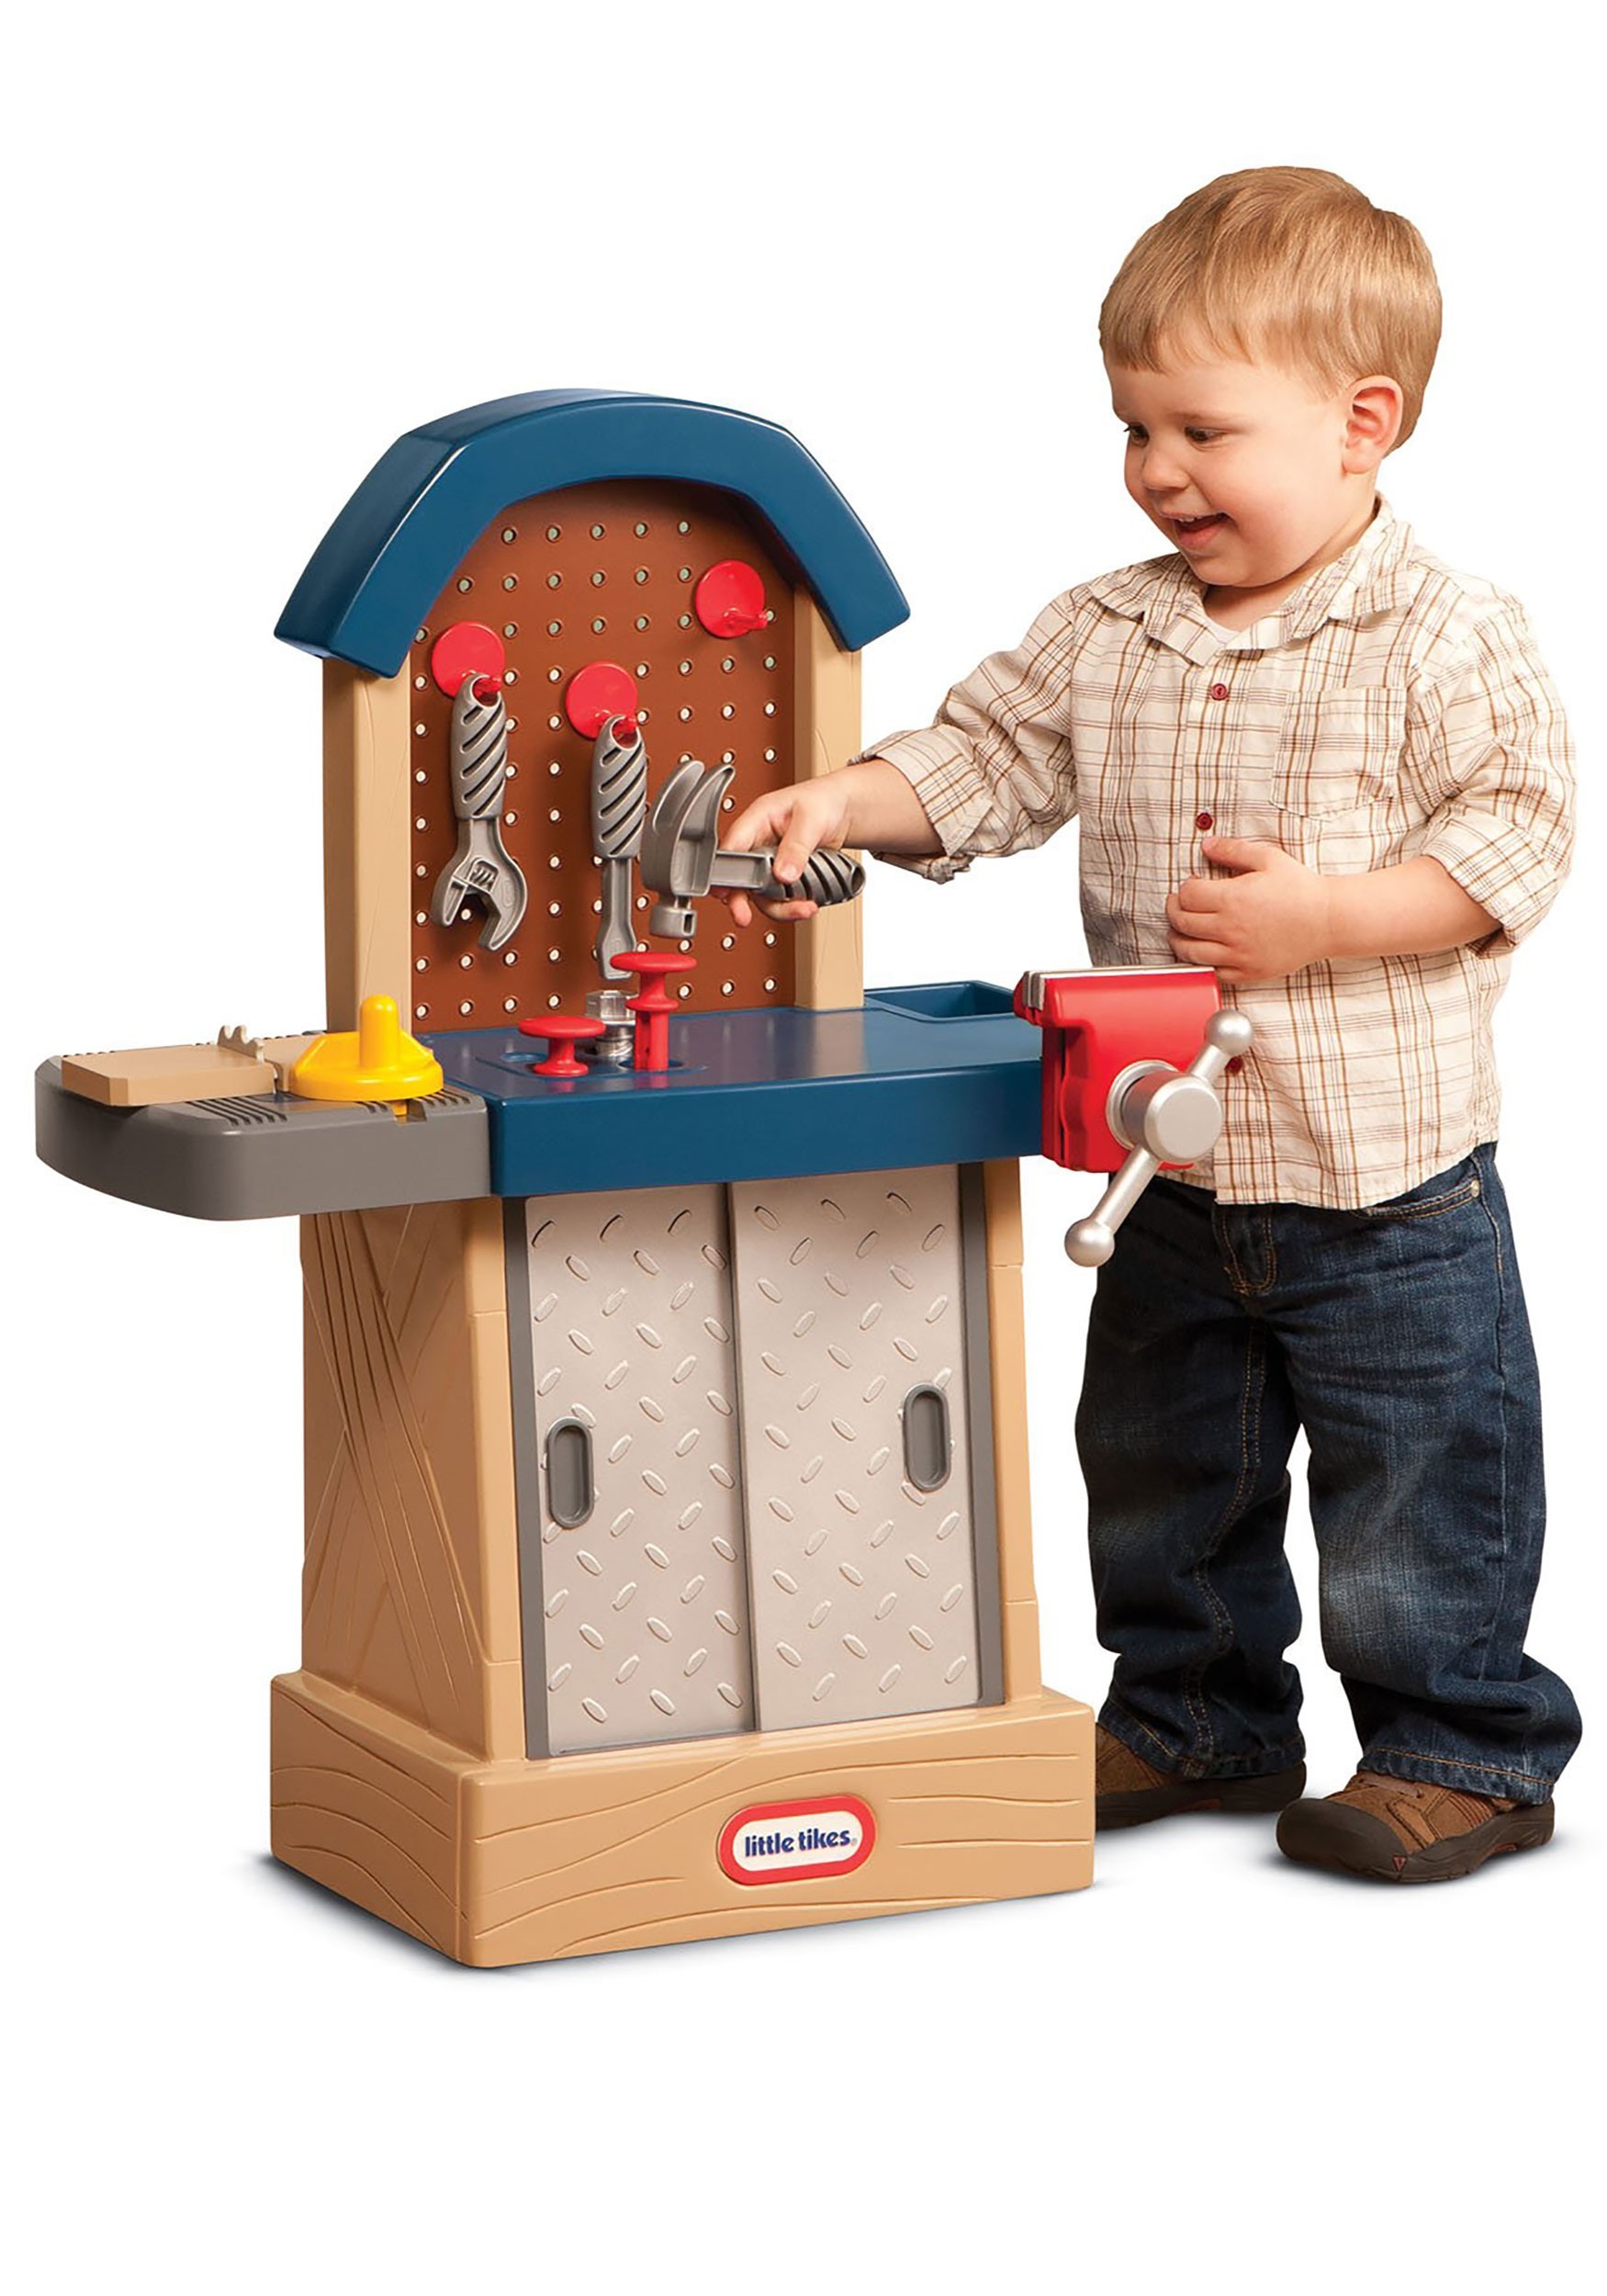 little tikes role play